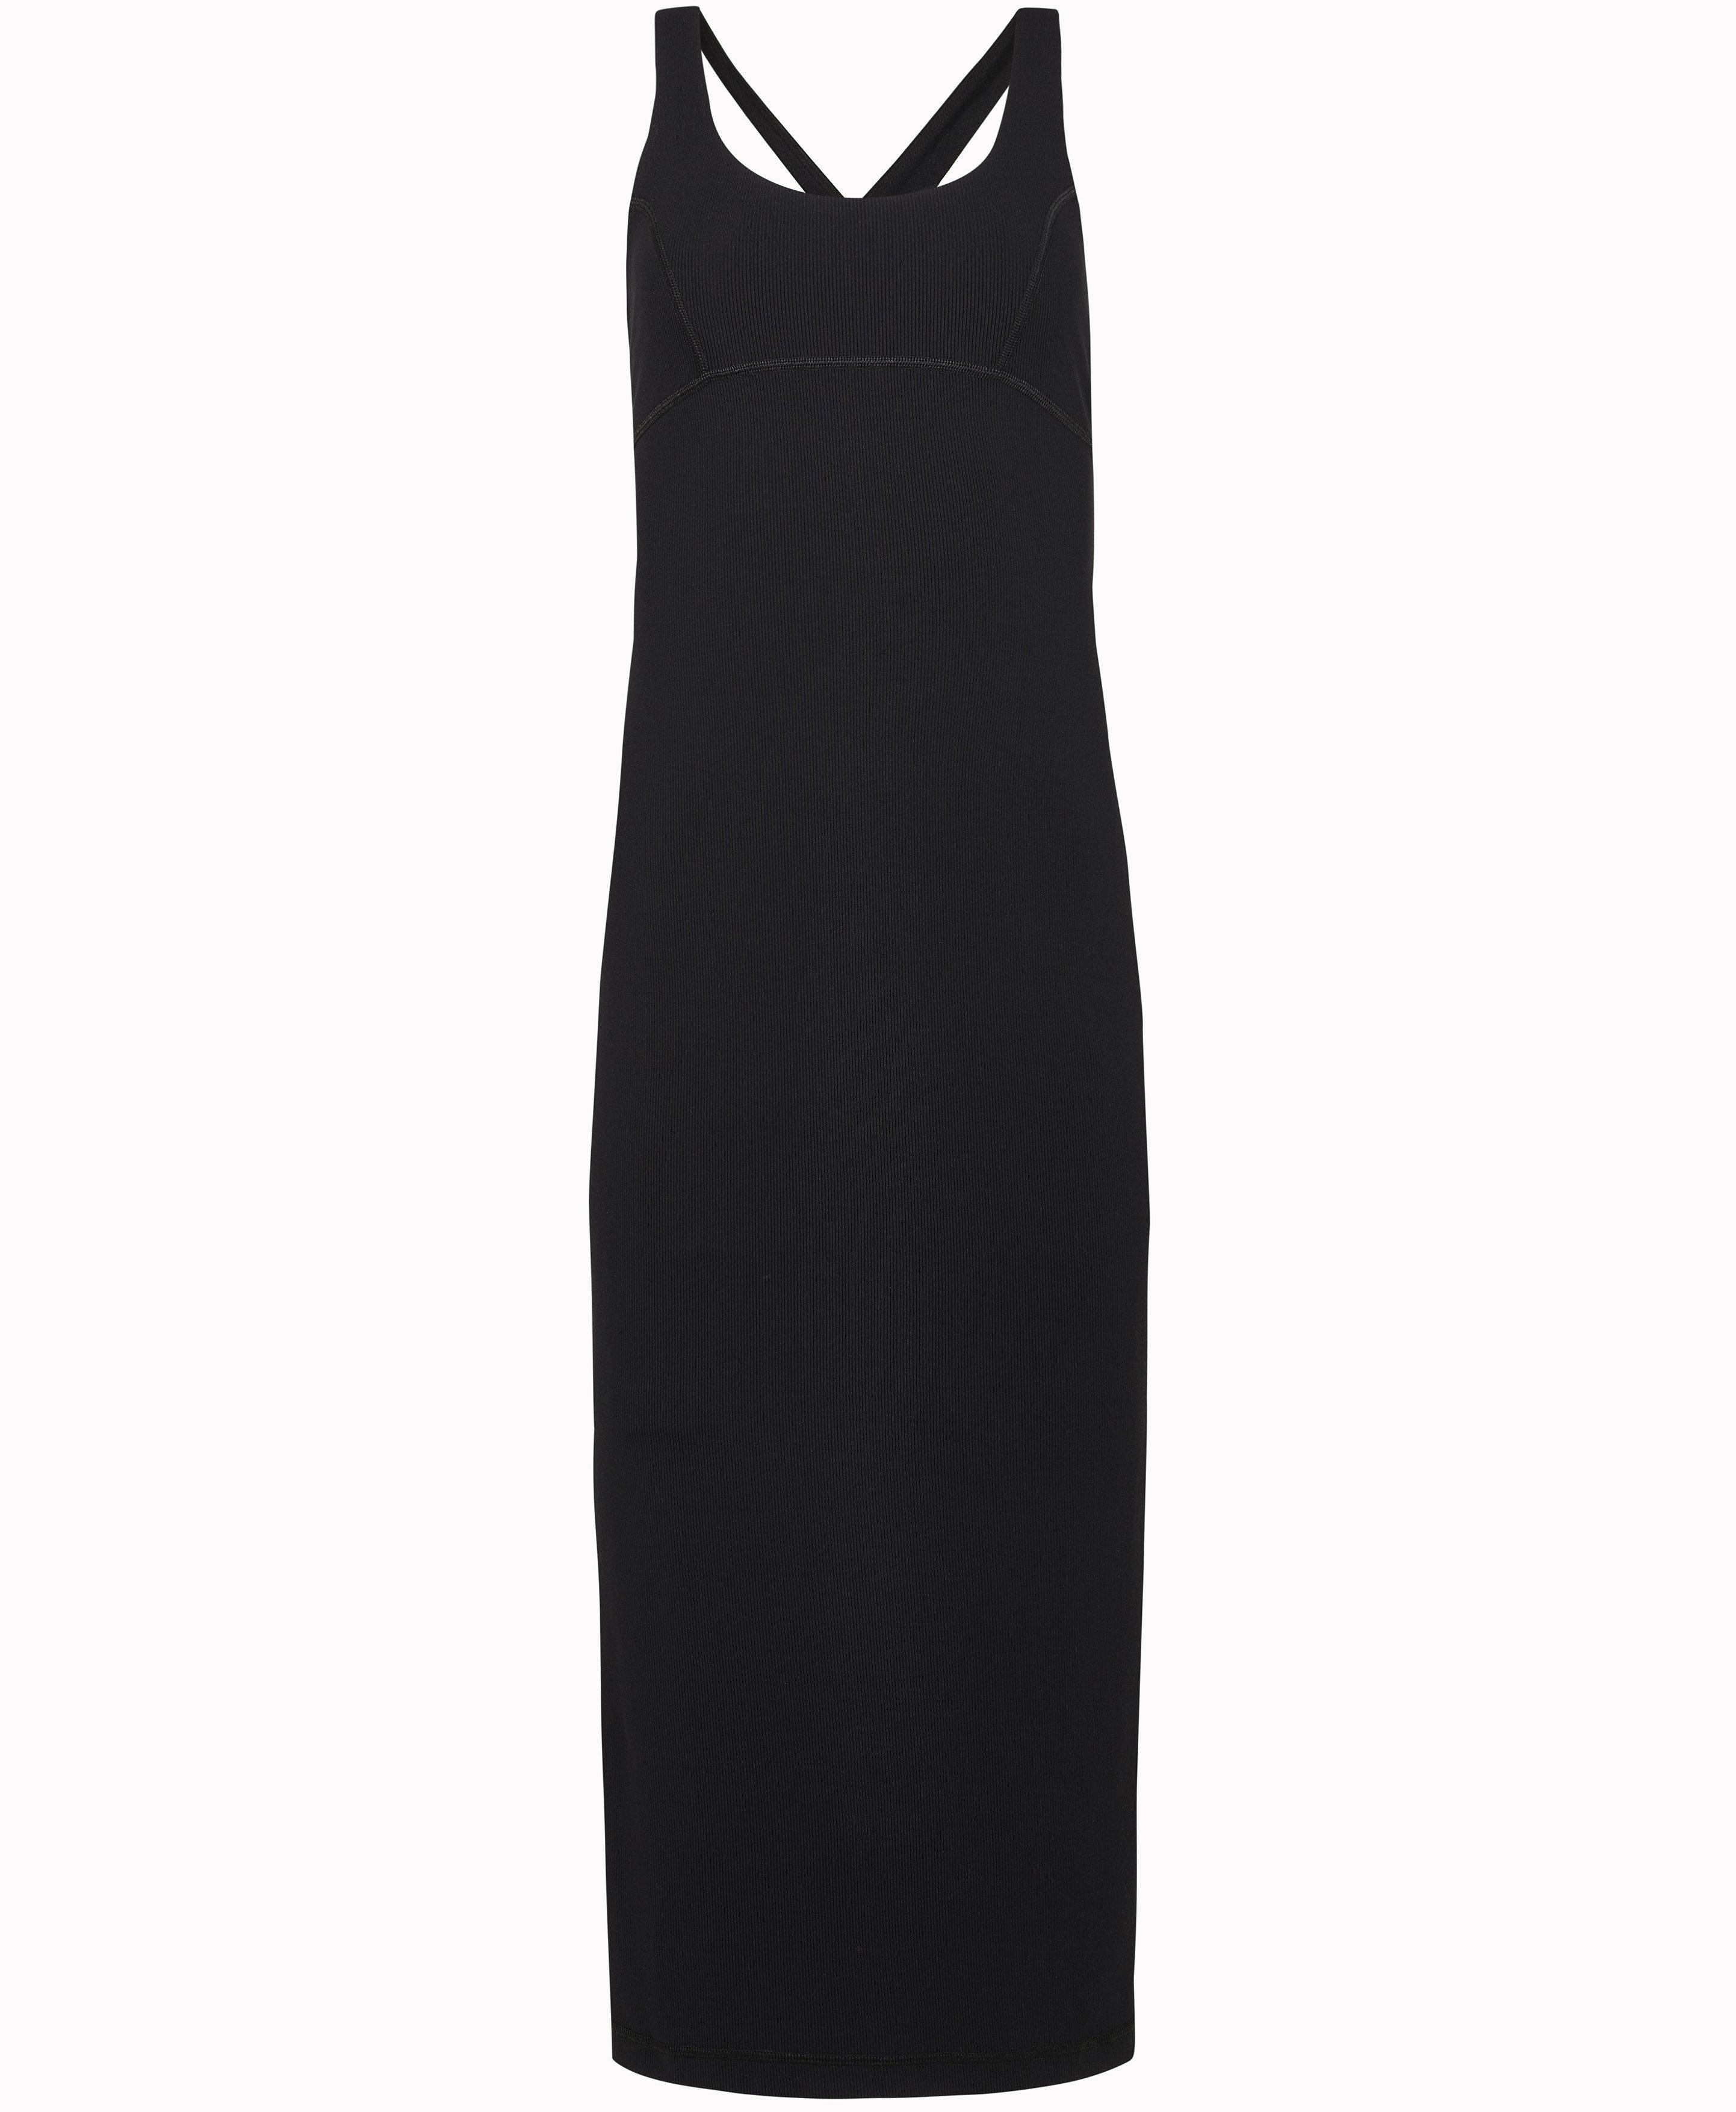 Scoop Women's Sleeveless Color Block Maxi Dress with Side Cutouts 